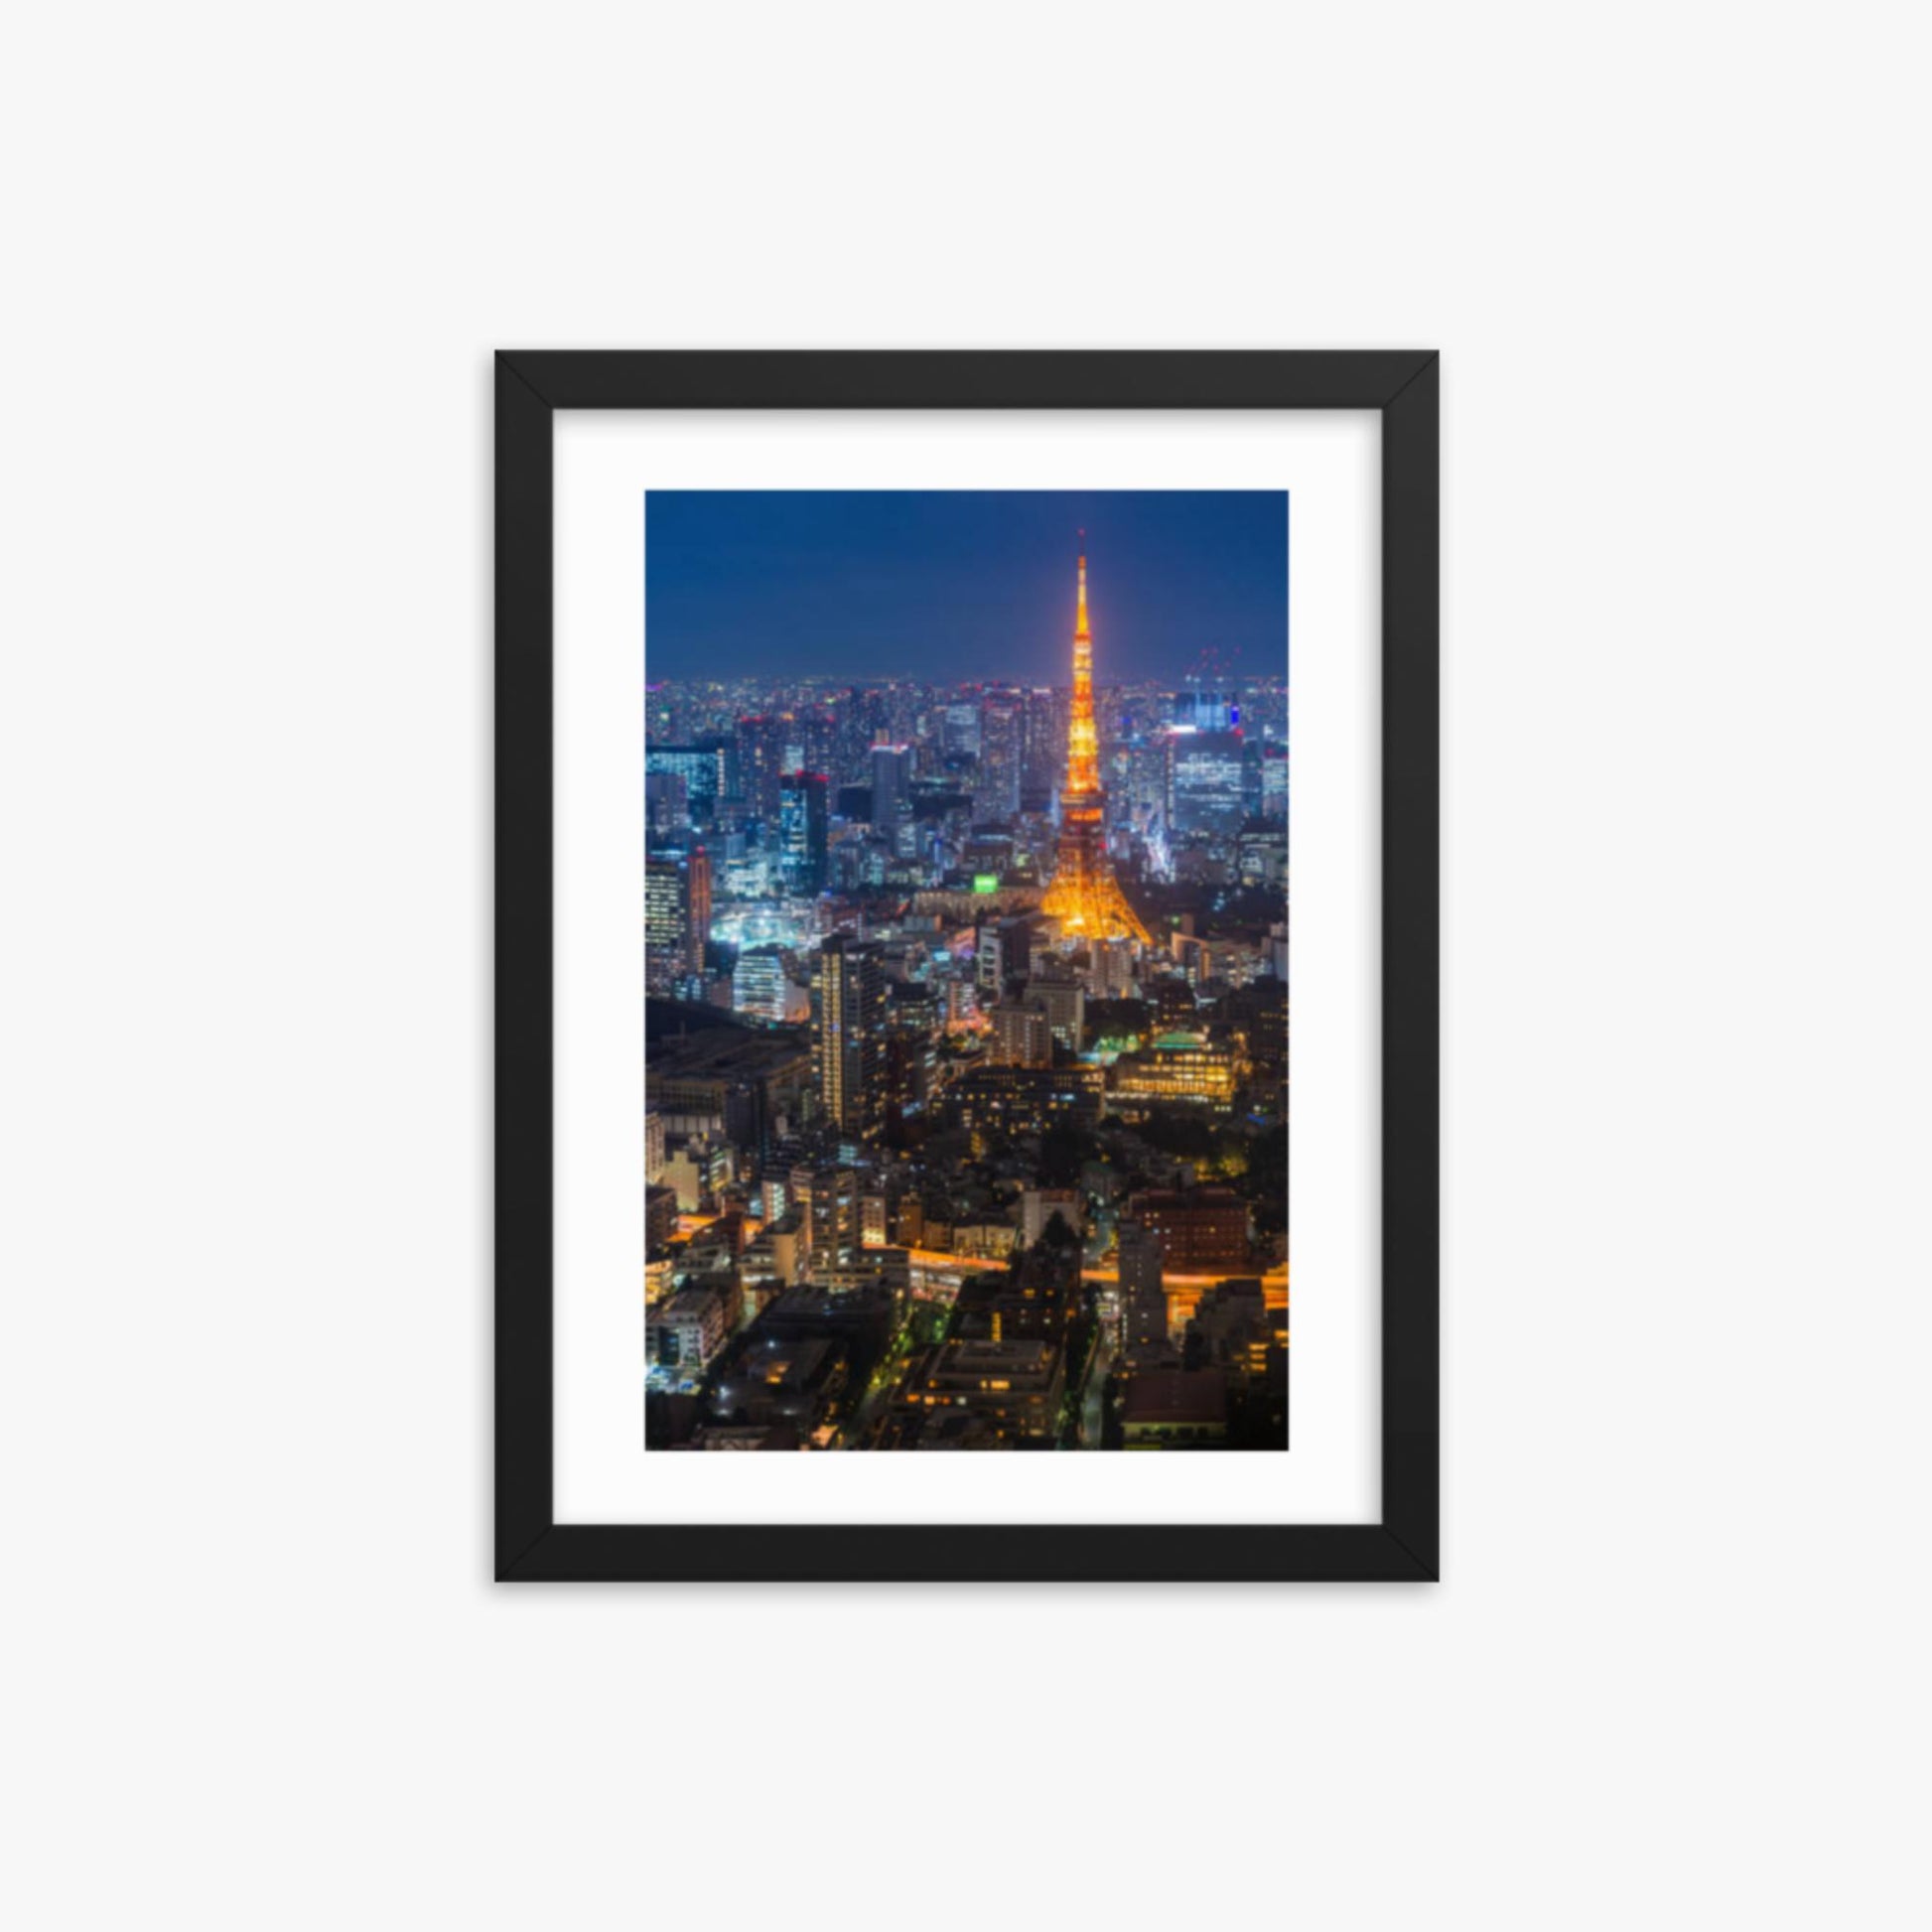 Tokyo Tower illuminated 12x16 in Poster With Black Frame